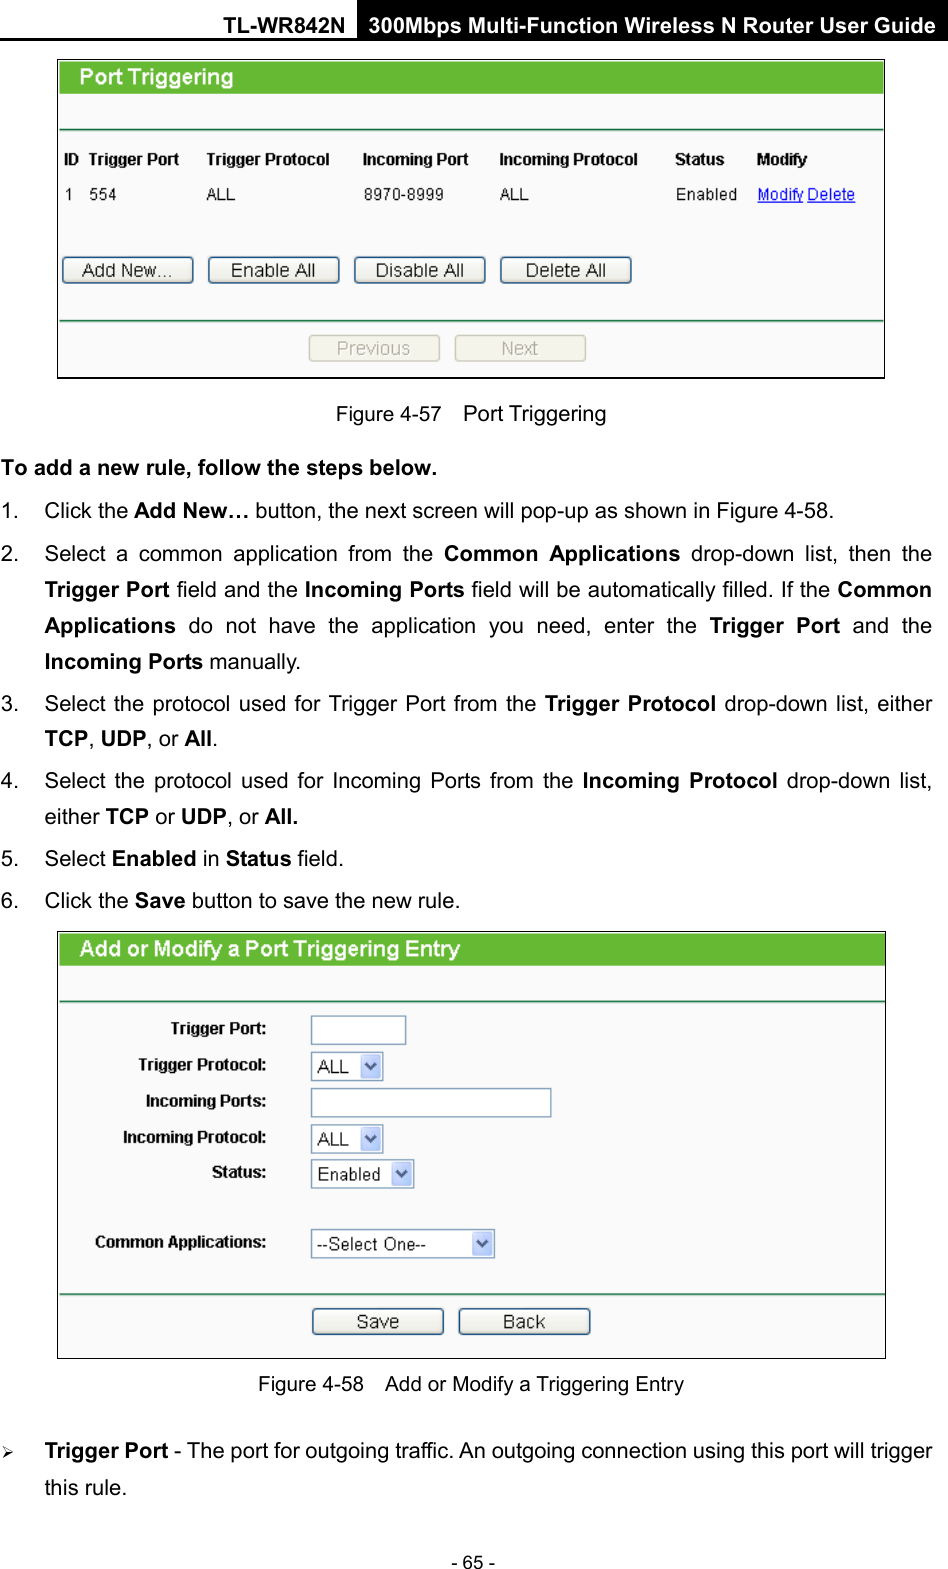 TL-WR842N 300Mbps Multi-Function Wireless N Router User Guide  - 65 -  Figure 4-57  Port Triggering To add a new rule, follow the steps below.   1. Click the Add New… button, the next screen will pop-up as shown in Figure 4-58. 2. Select a common application from the Common Applications drop-down list, then the Trigger Port field and the Incoming Ports field will be automatically filled. If the Common Applications  do not have the application you need, enter the Trigger Port and the Incoming Ports manually. 3. Select the protocol used for Trigger Port from the Trigger Protocol drop-down list, either TCP, UDP, or All. 4. Select the protocol used for Incoming Ports from the Incoming Protocol drop-down list, either TCP or UDP, or All. 5. Select Enabled in Status field.   6. Click the Save button to save the new rule.  Figure 4-58  Add or Modify a Triggering Entry  Trigger Port - The port for outgoing traffic. An outgoing connection using this port will trigger this rule.   